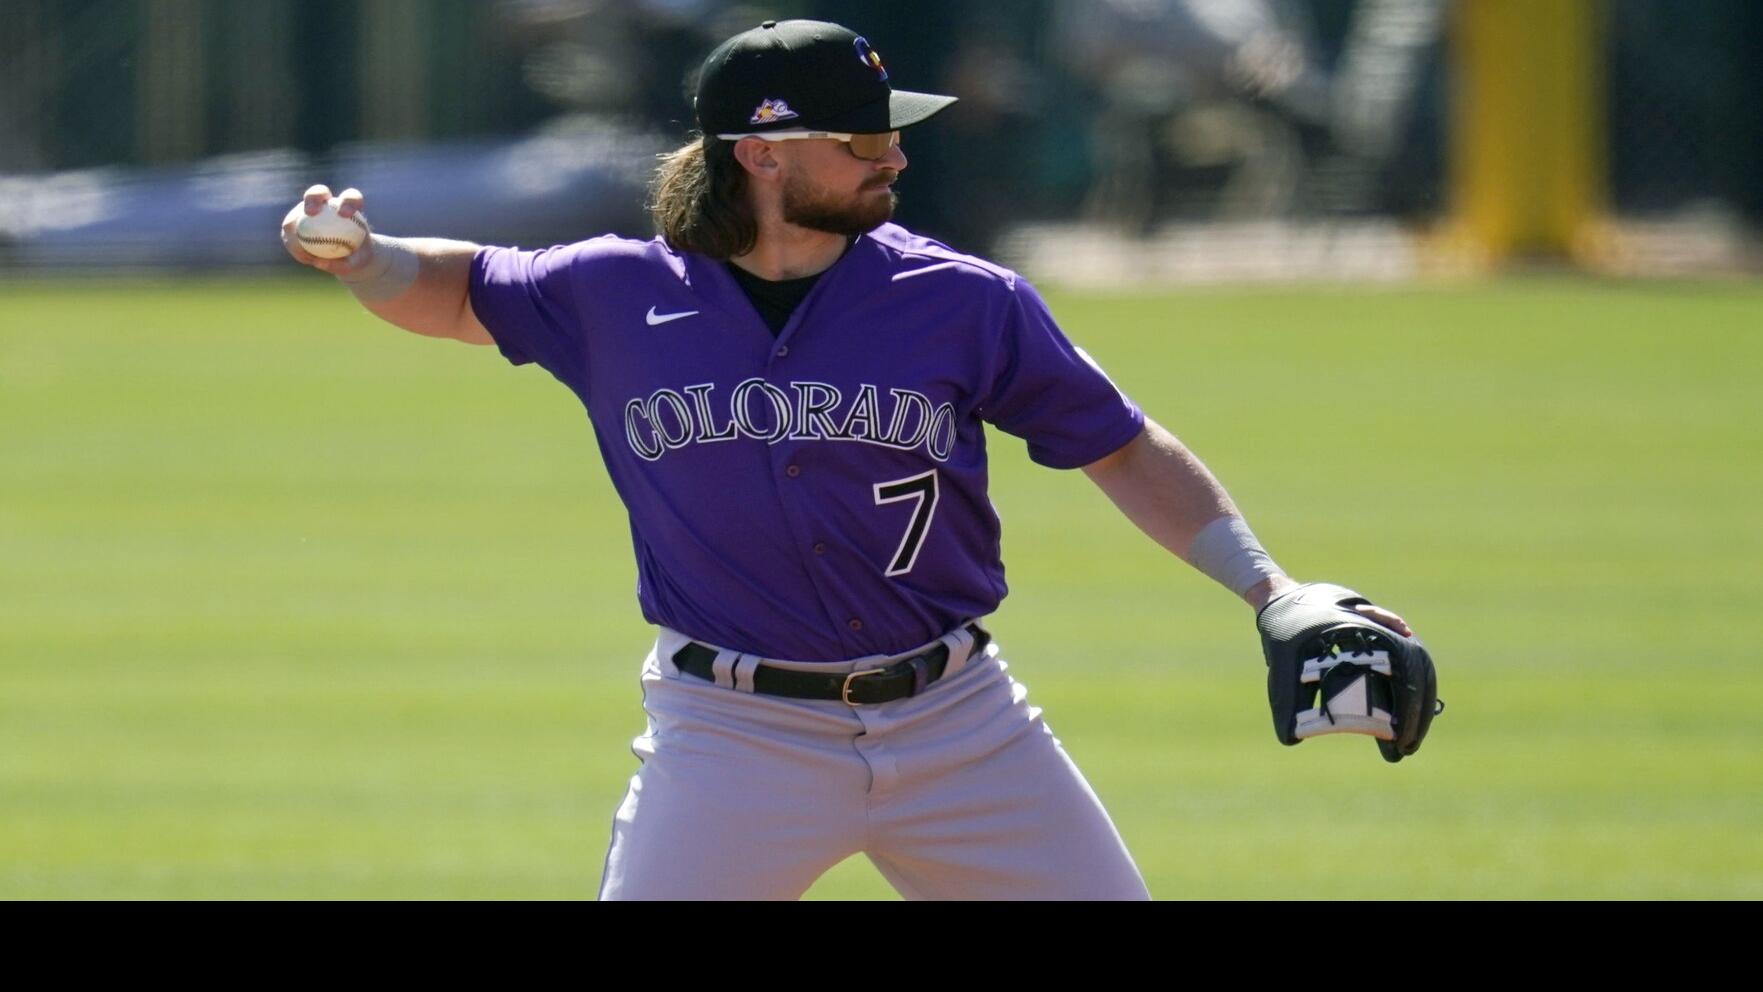 Woody Paige: Talking stick, roster doesn't bode well for Colorado Rockies, Denver-gazette